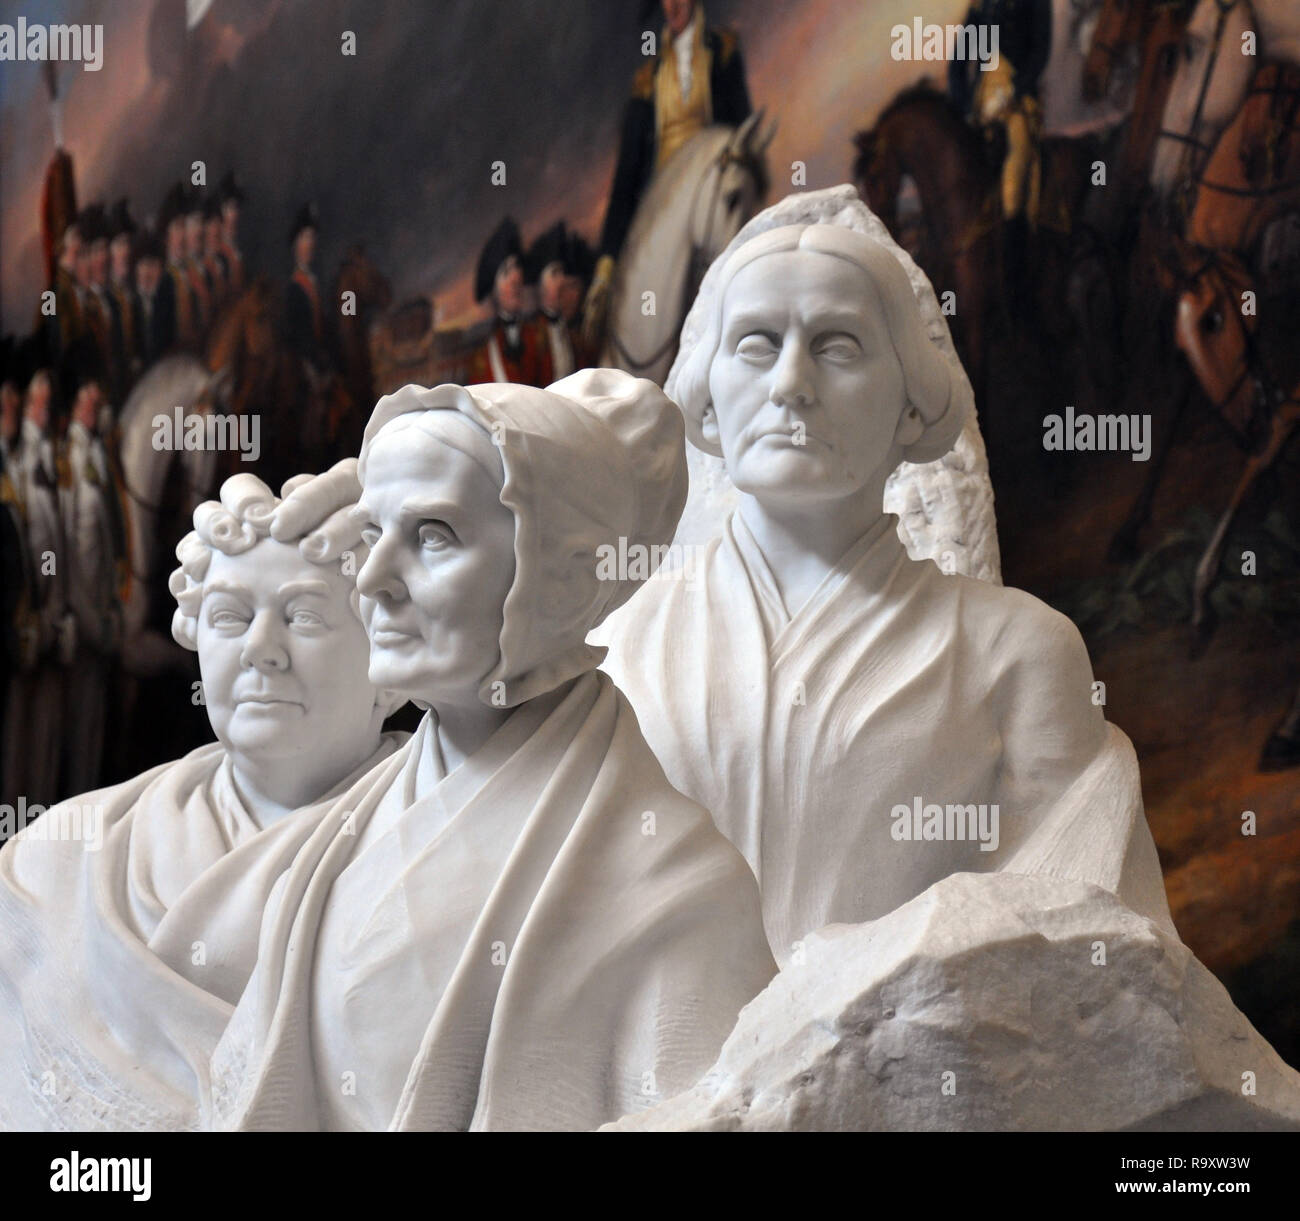 Statue of the Suffragettes Elizabeth Stanton, Susan B. Anthony and Lucretia Mott by Adelaide Johnson in the US Capitol Rotunda in Washington DC Stock Photo